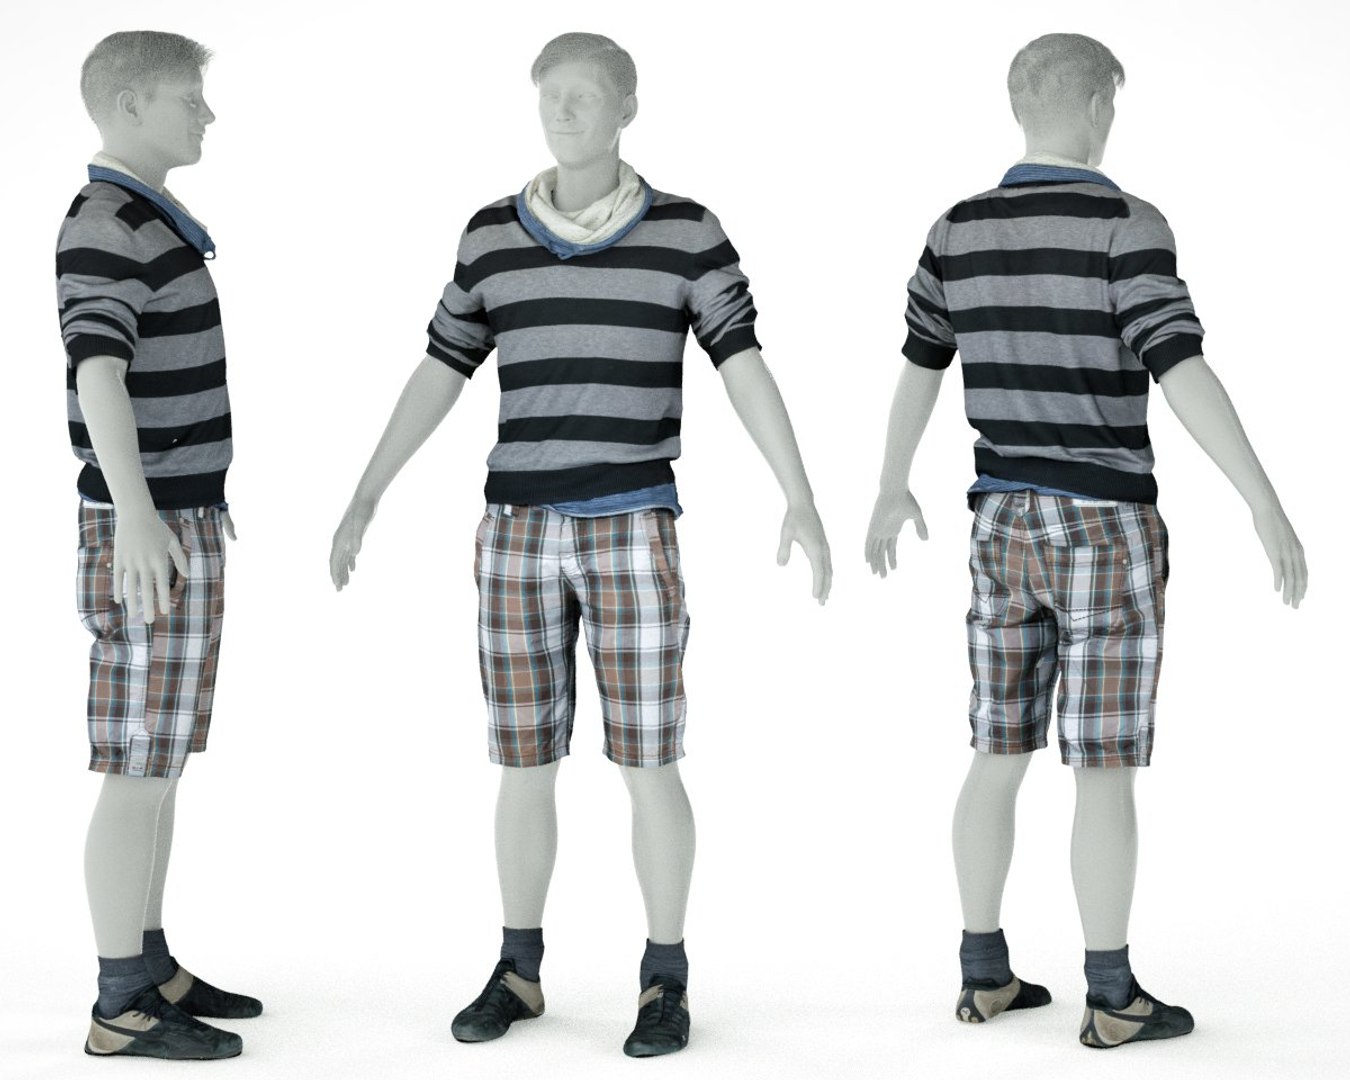 Male clothing outfit 3D model - TurboSquid 1329840